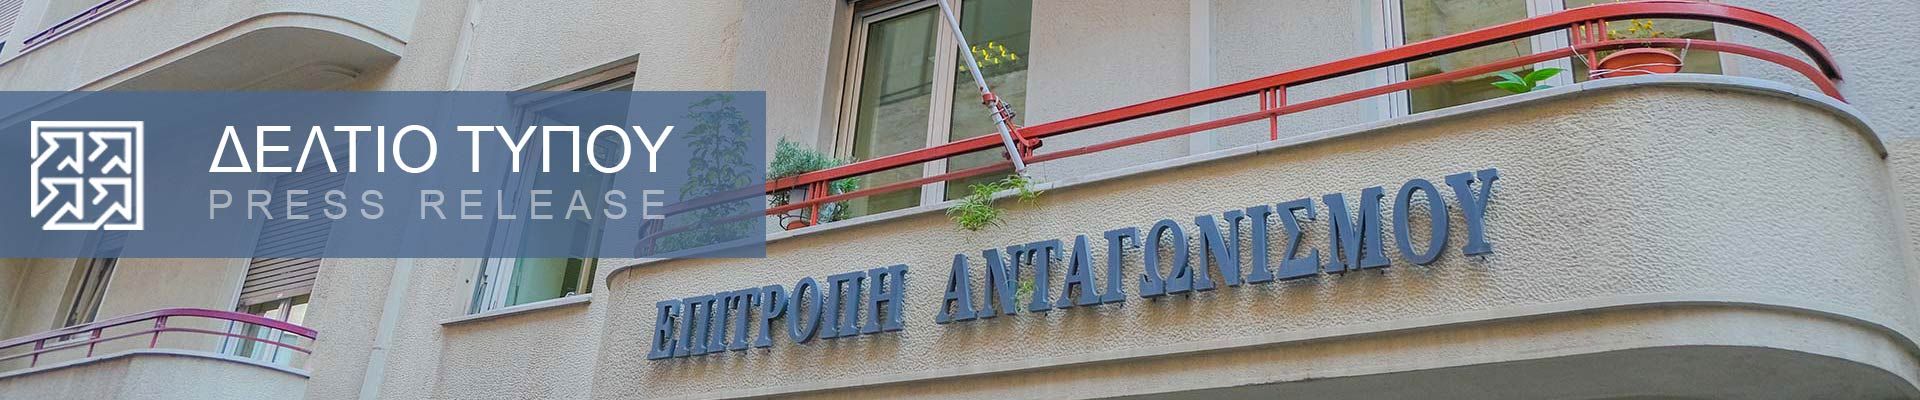 Press Release - Clearance of the acquisition of SYNERGAZOMENI PANTOPOLES by KRITIKOS ANEDIK under commitments